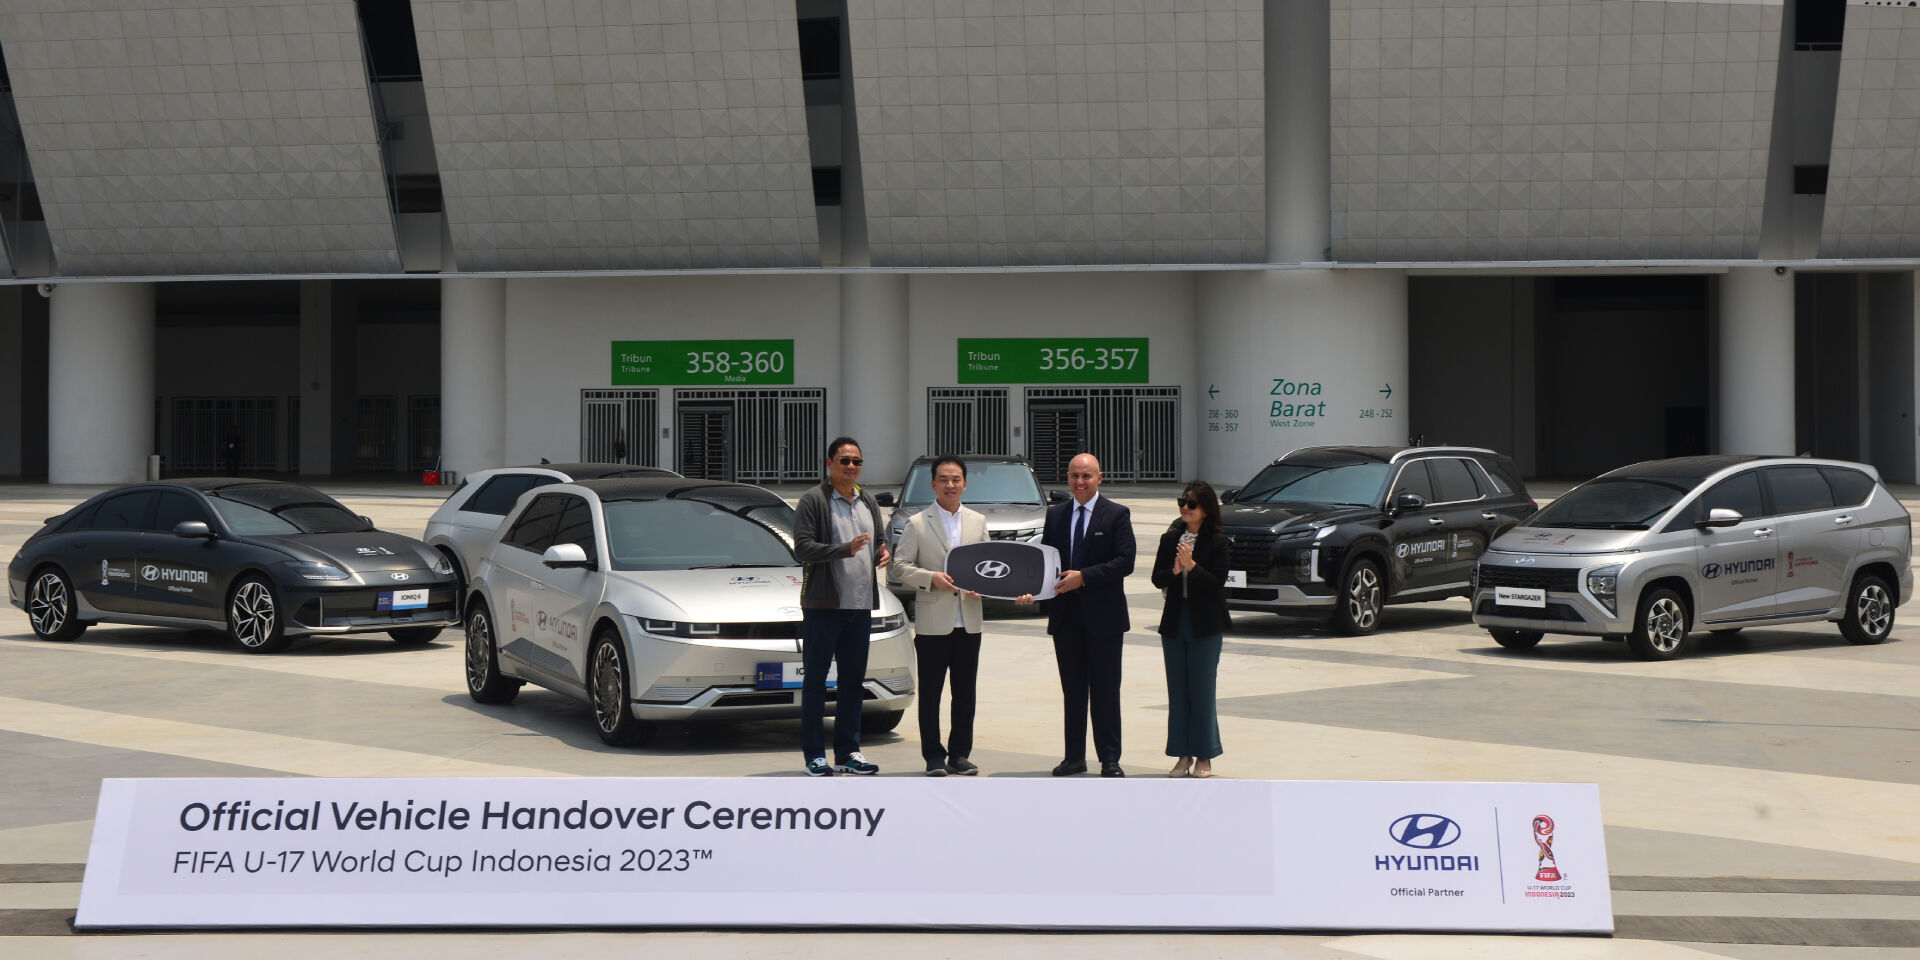 Hyundai Hands Over 148 Vehicles to Support the Success of FIFA U-17 World Cup Indonesia 2023™